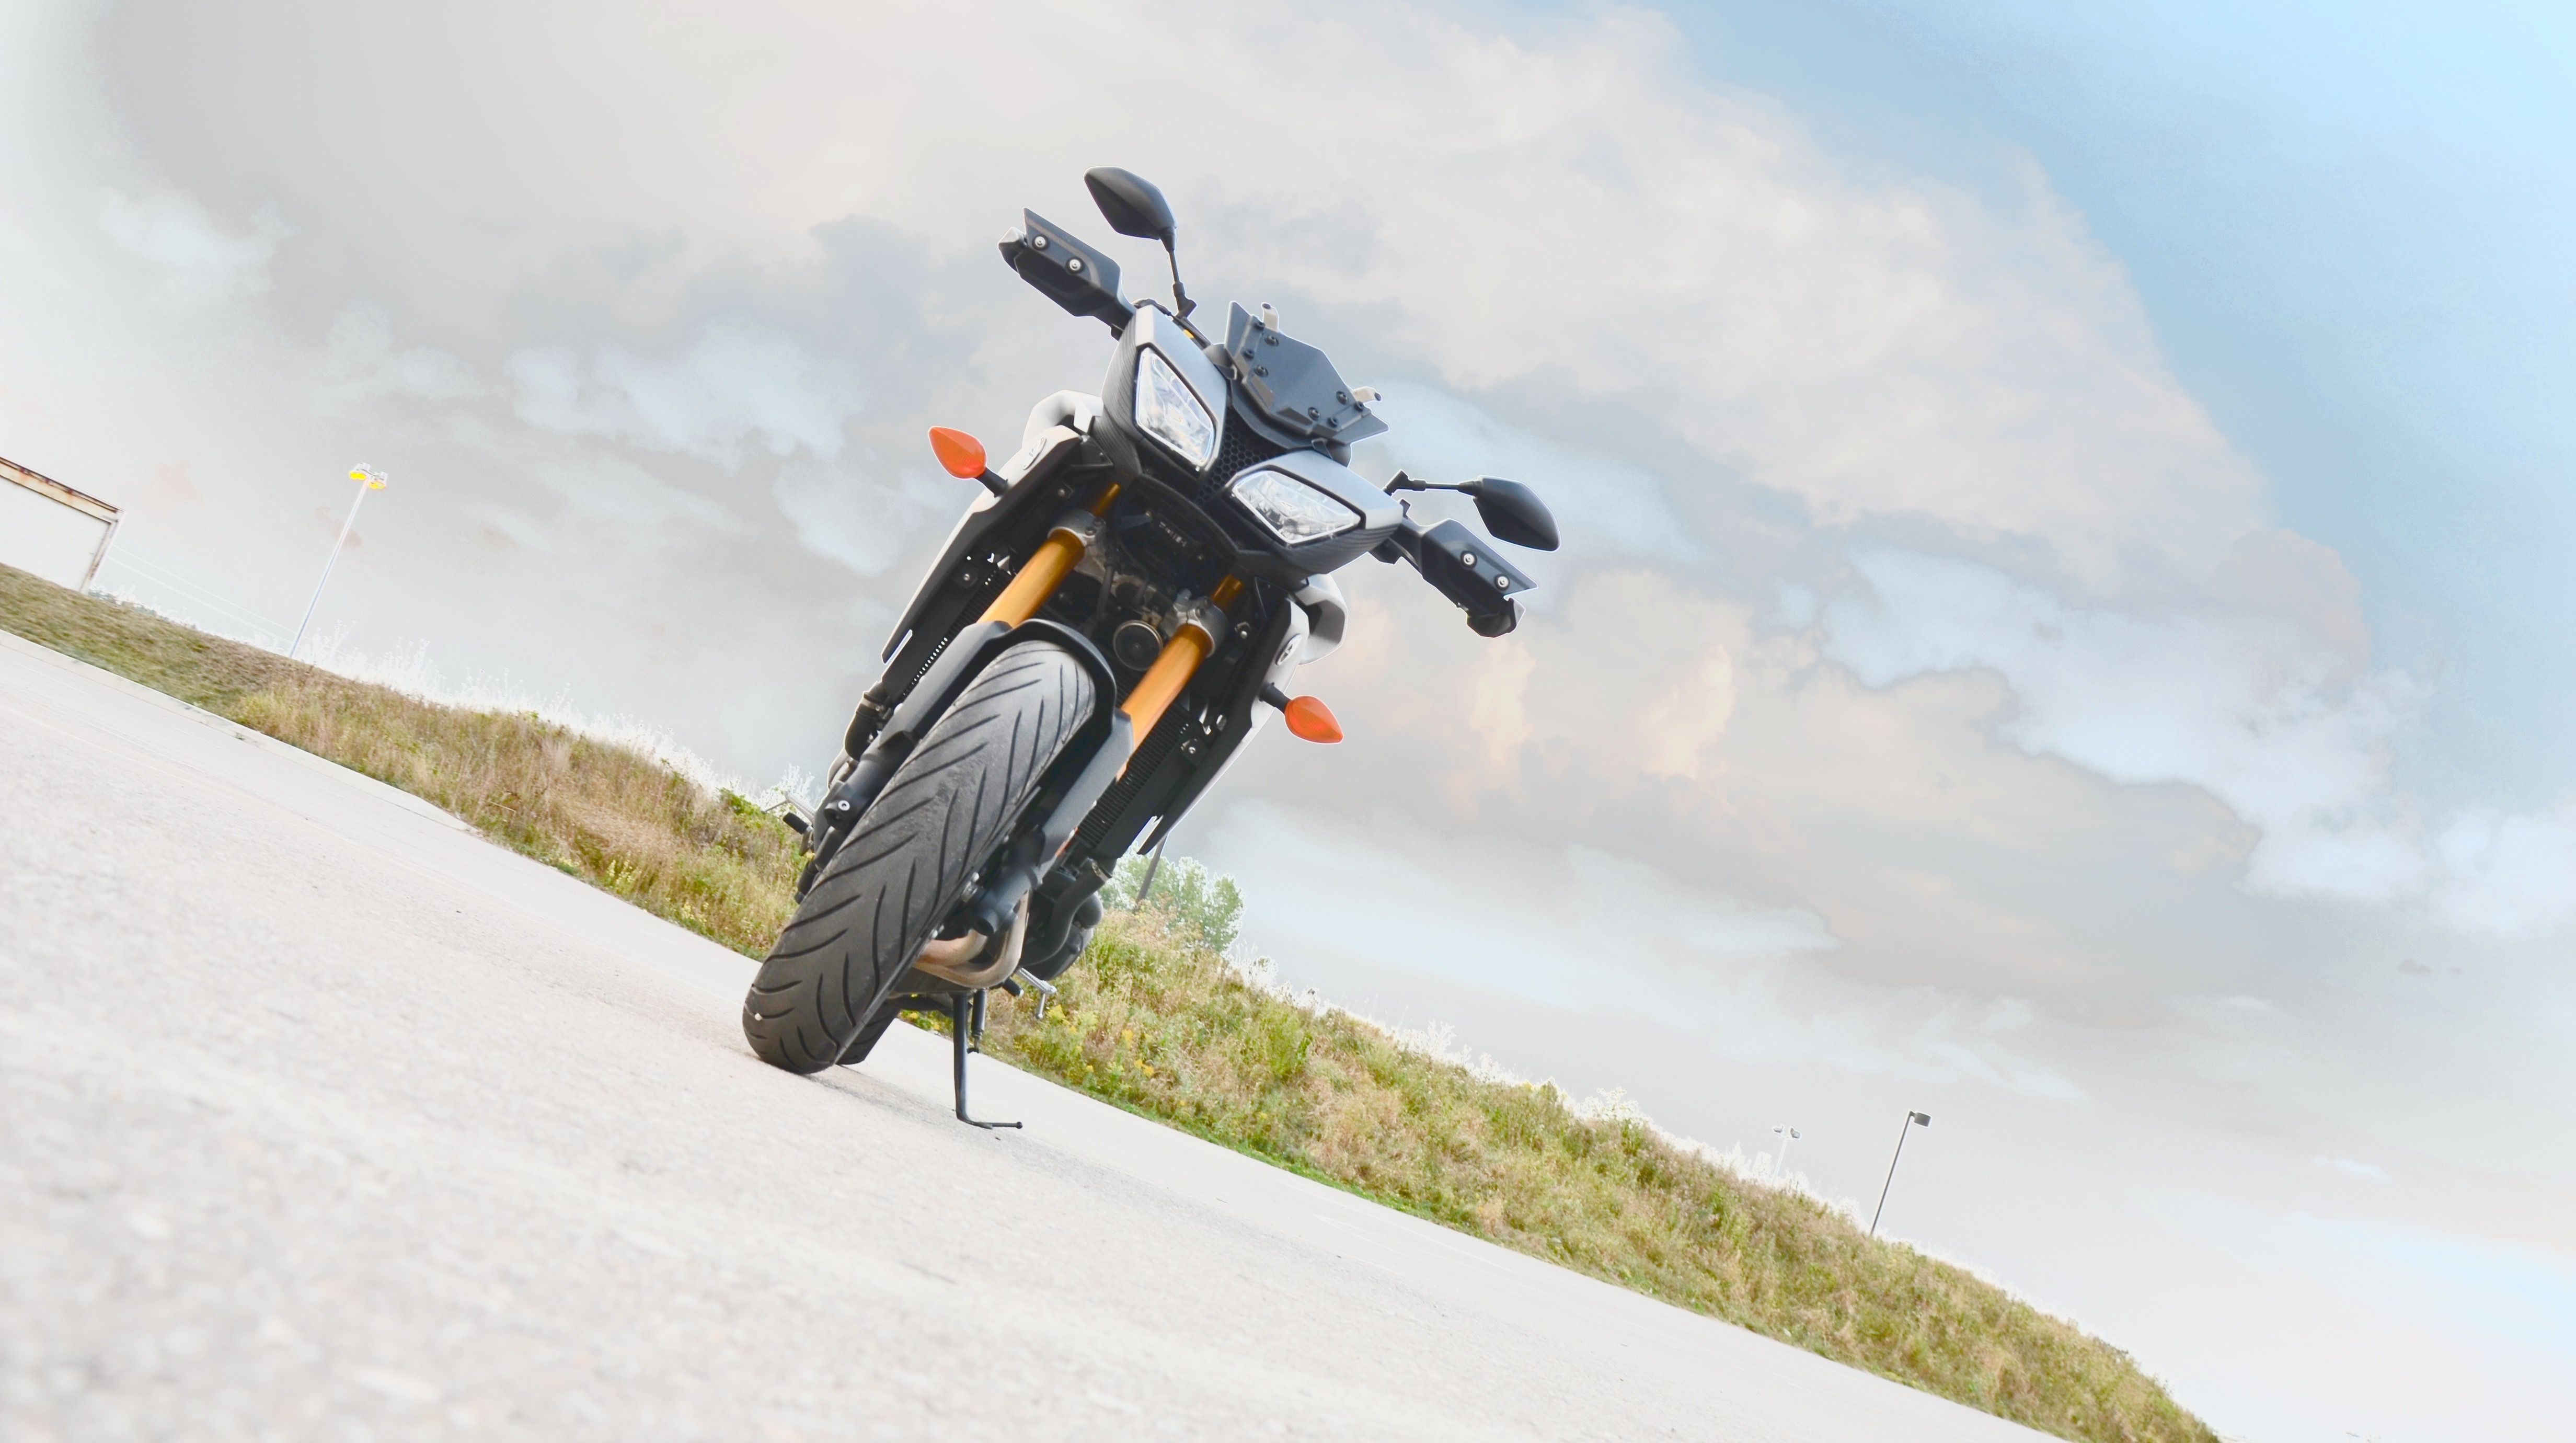 2015 Yamaha FJ-09: The ideal bike for just ripping around.